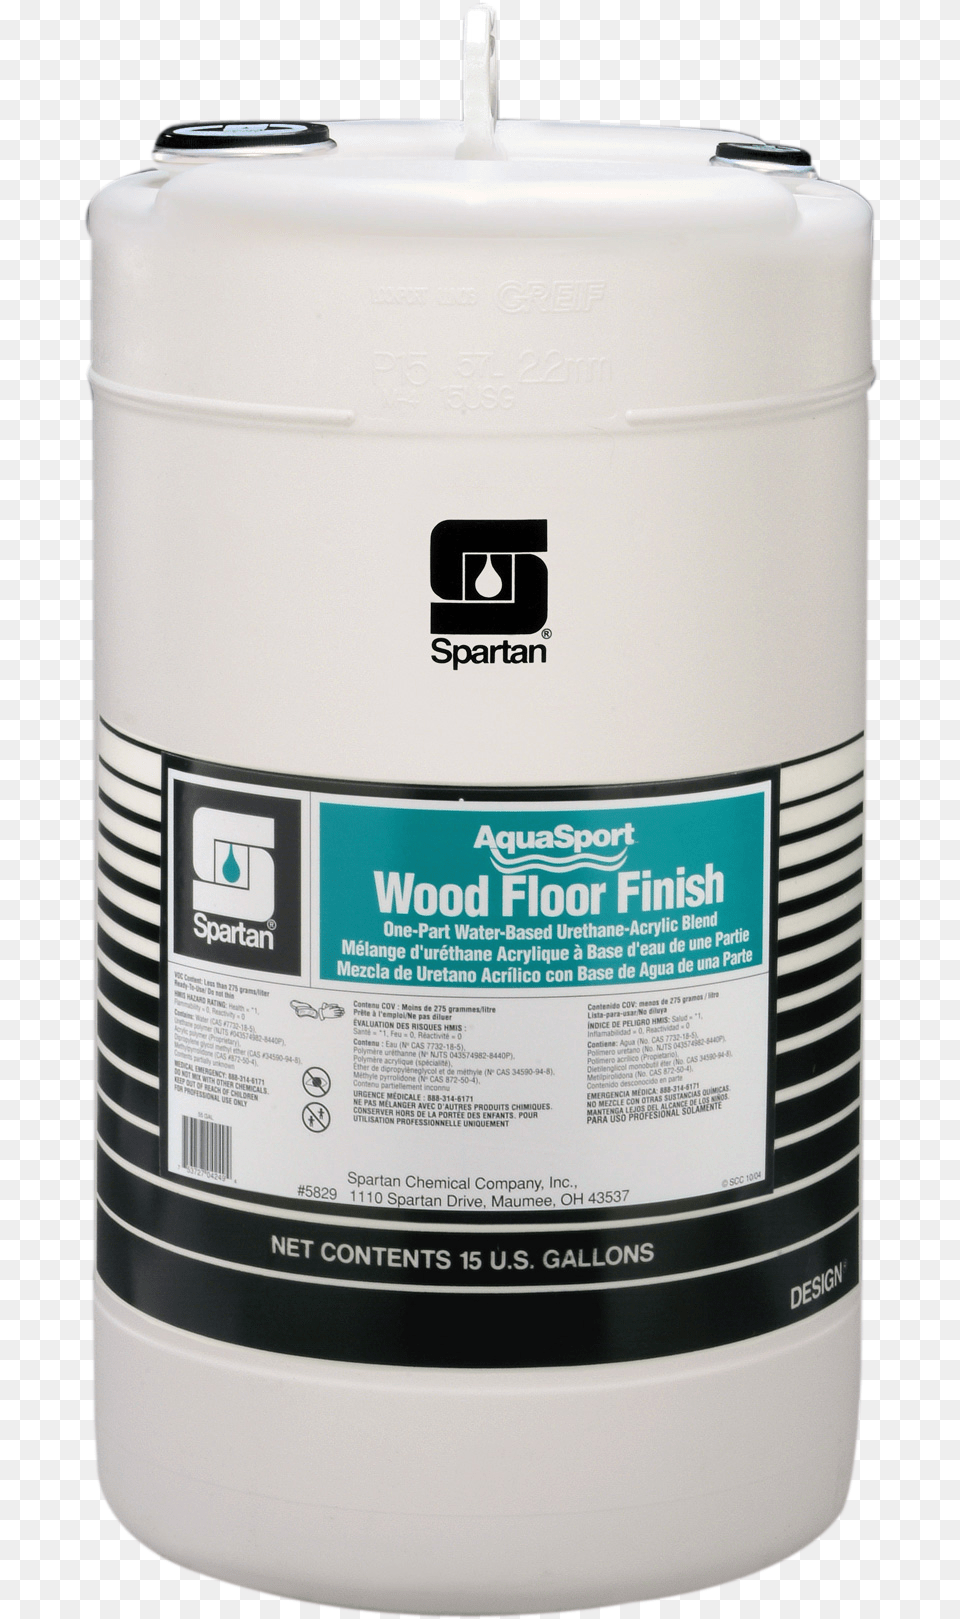 Aquasport Wood Floor Finish Spartan Consume Micro Muscle Industrial Strength Degreaser, Bottle, Shaker Free Png